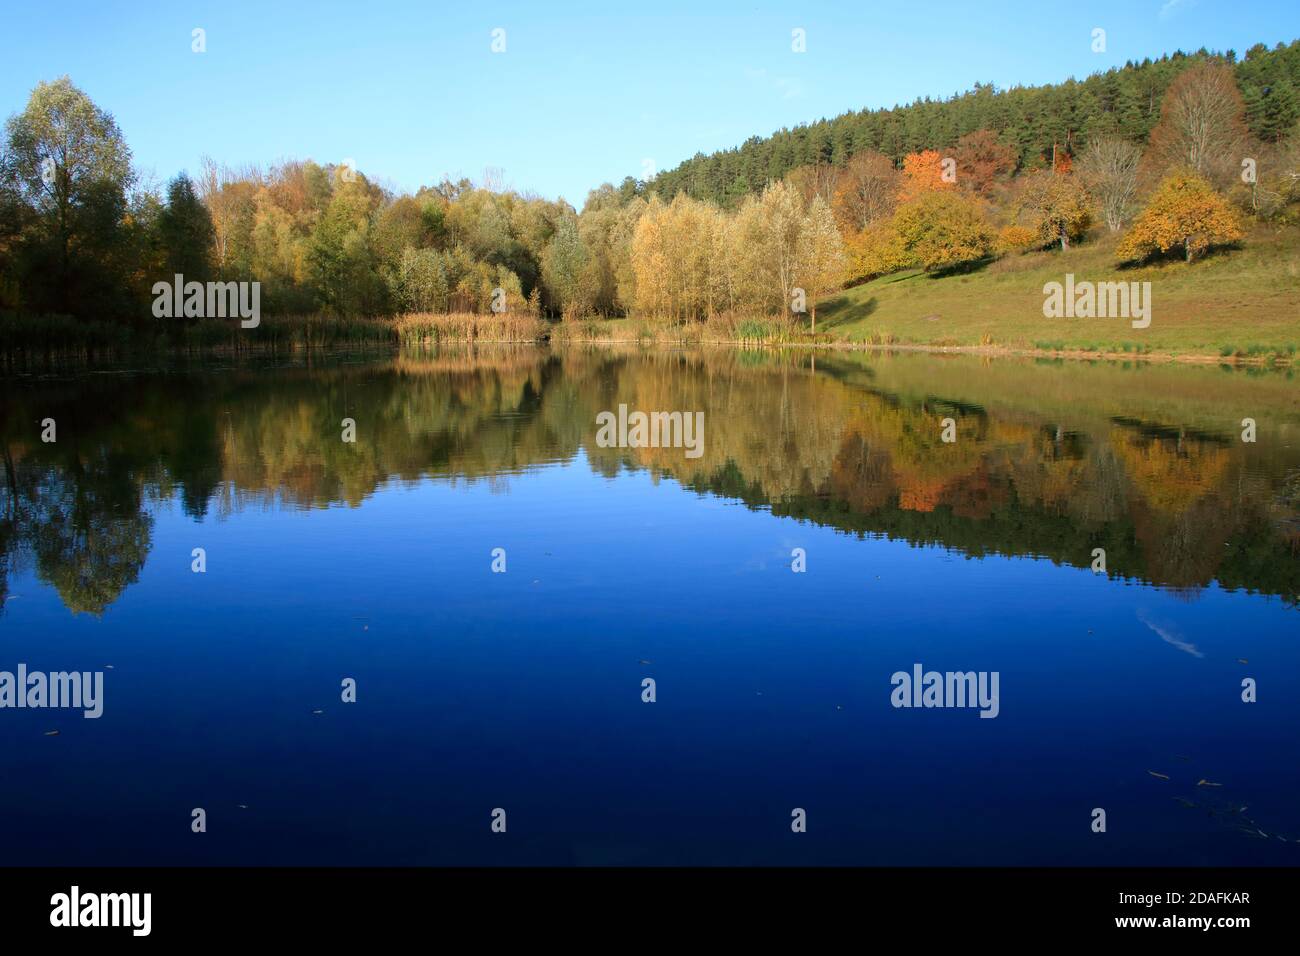 View of the lake gültlingen. The autumn forest is reflected in the lake. Stock Photo